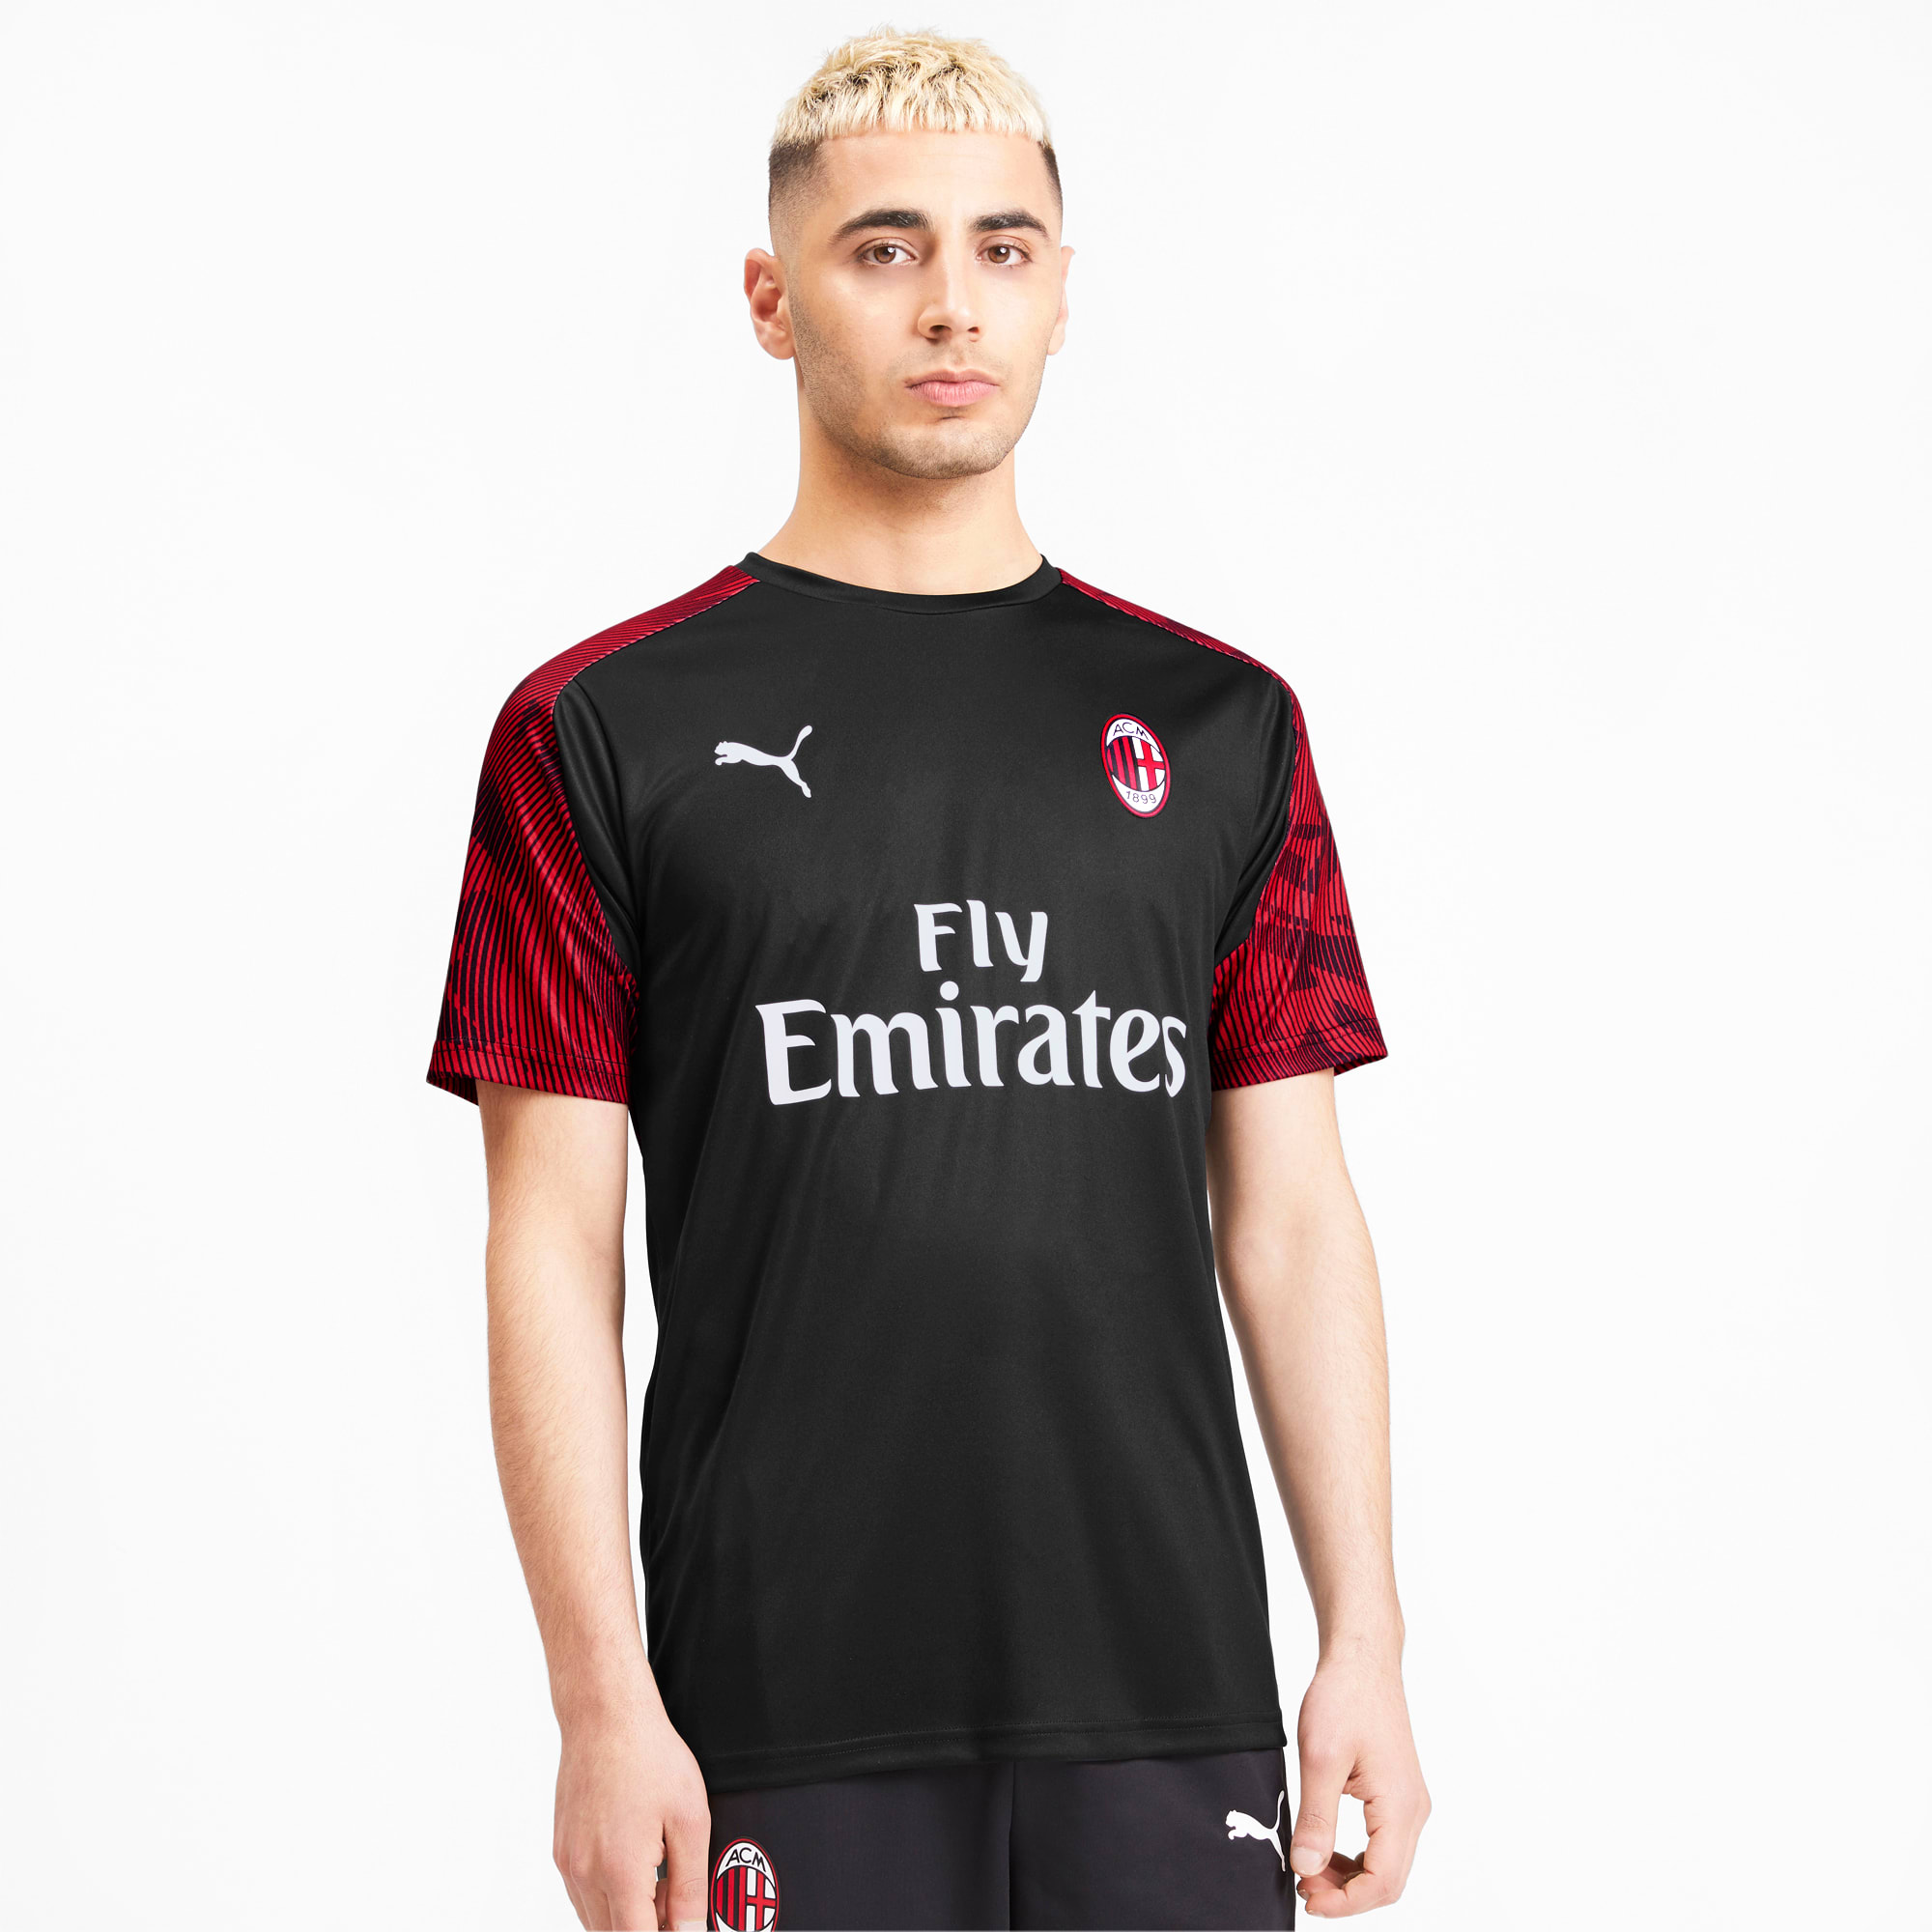 fly emirates red and black jersey